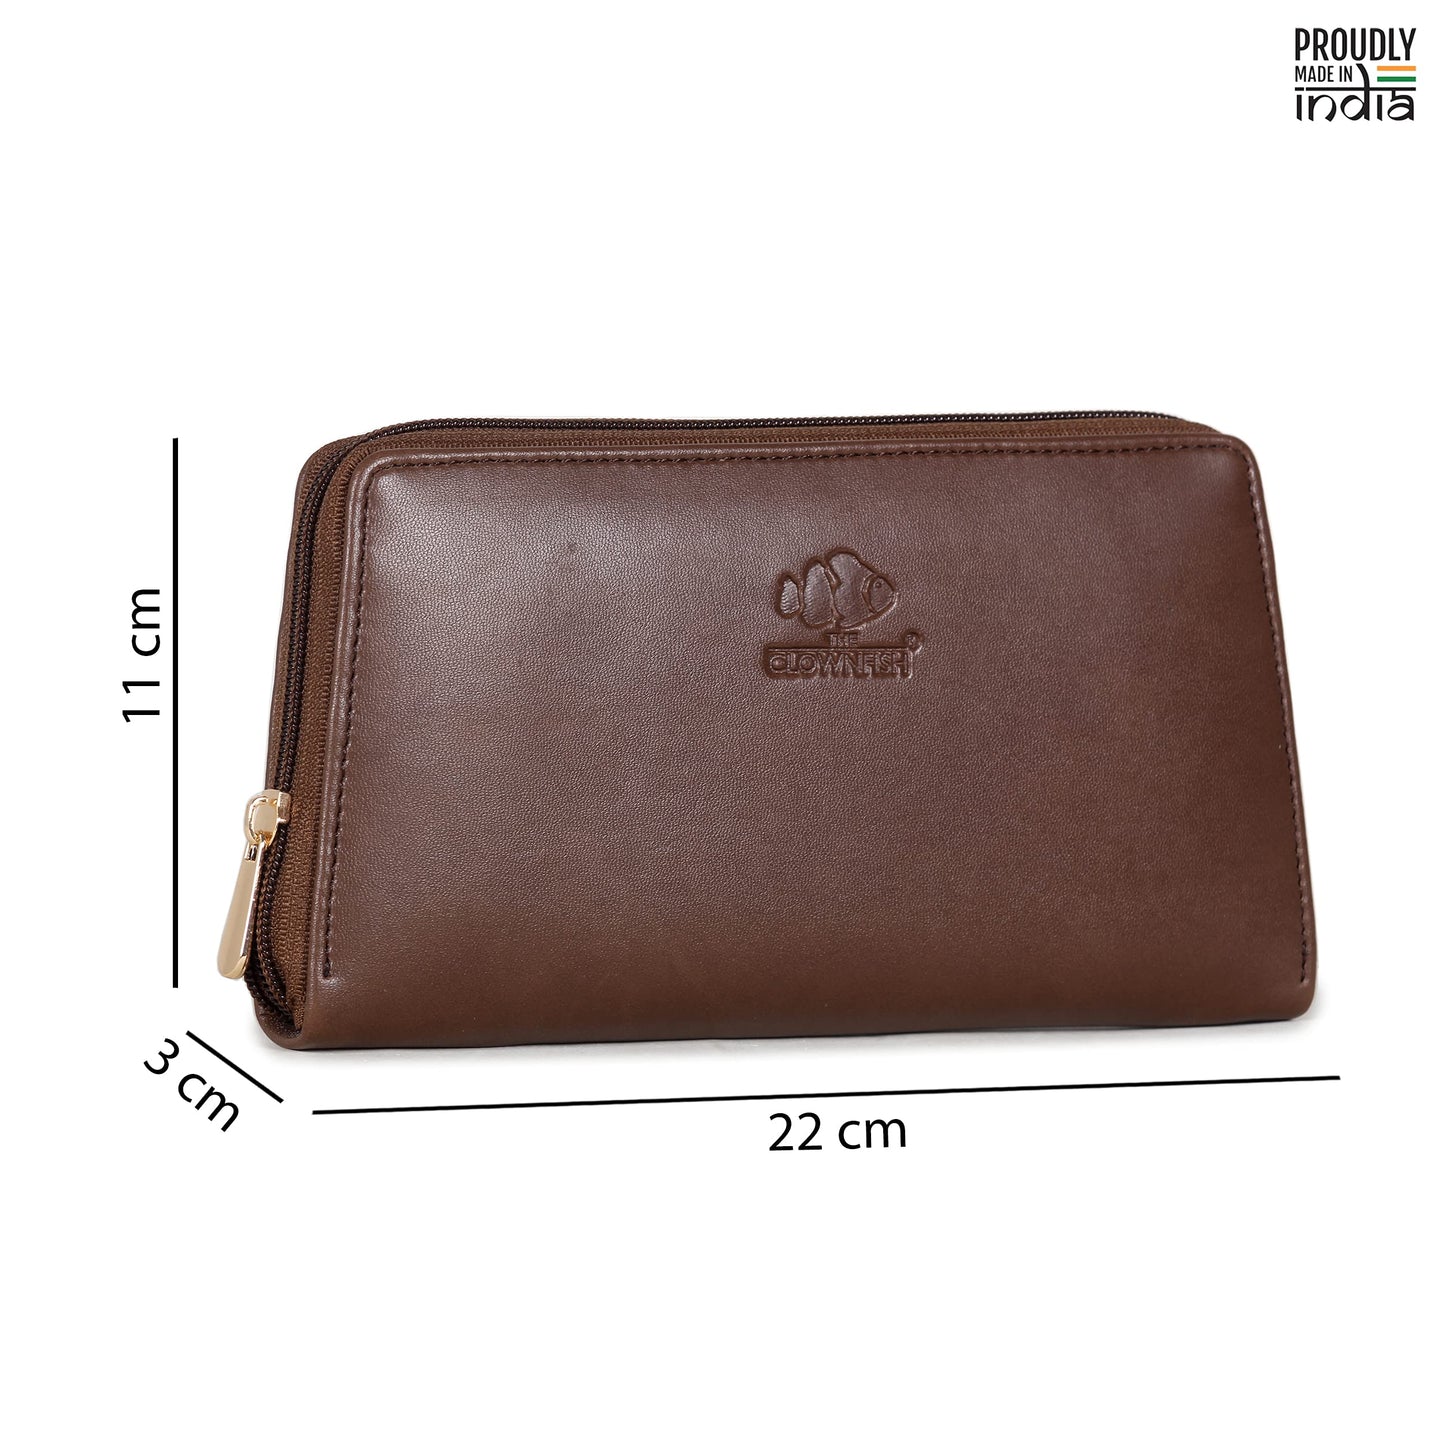 THE CLOWNFISH Evelyn Collection Womens Wallet Clutch Ladies Purse with Multiple Card Slots Dark Brown